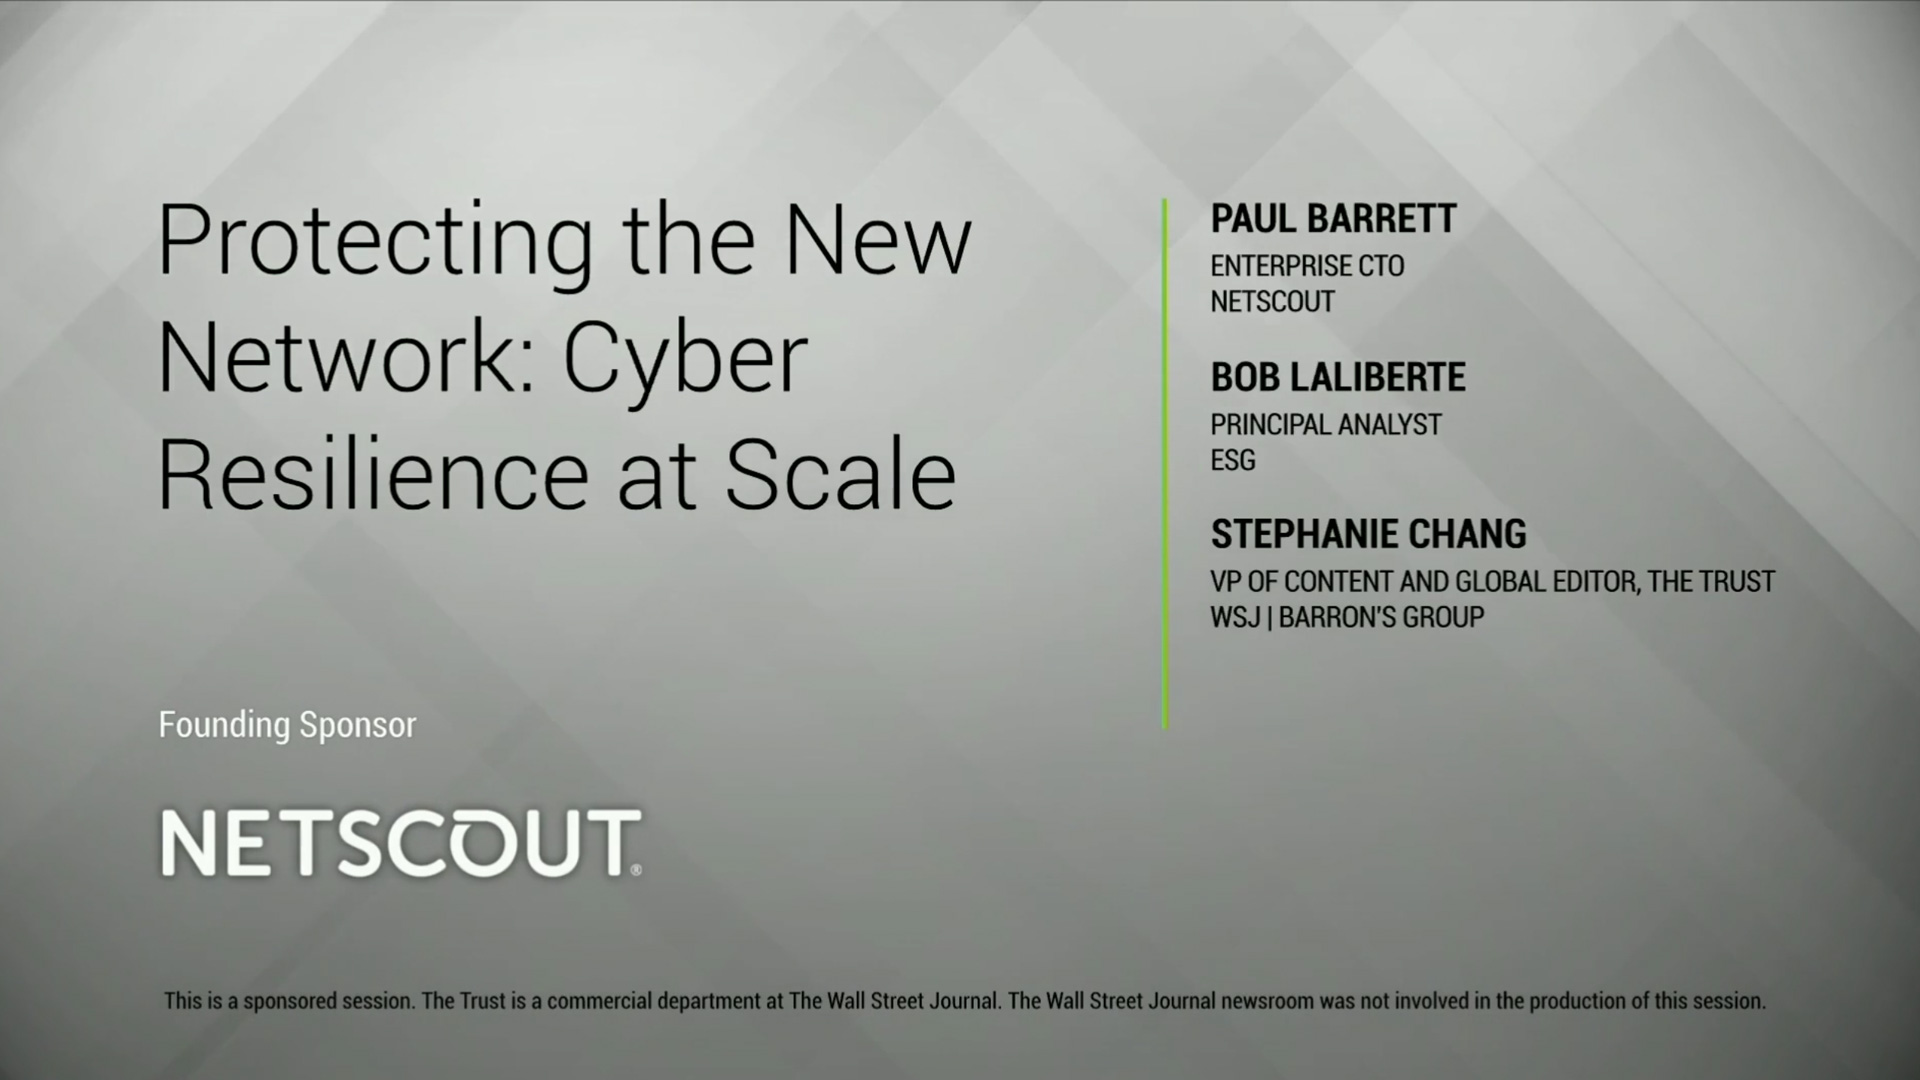 Protecting The New Network - Cyber Resilience At Scale